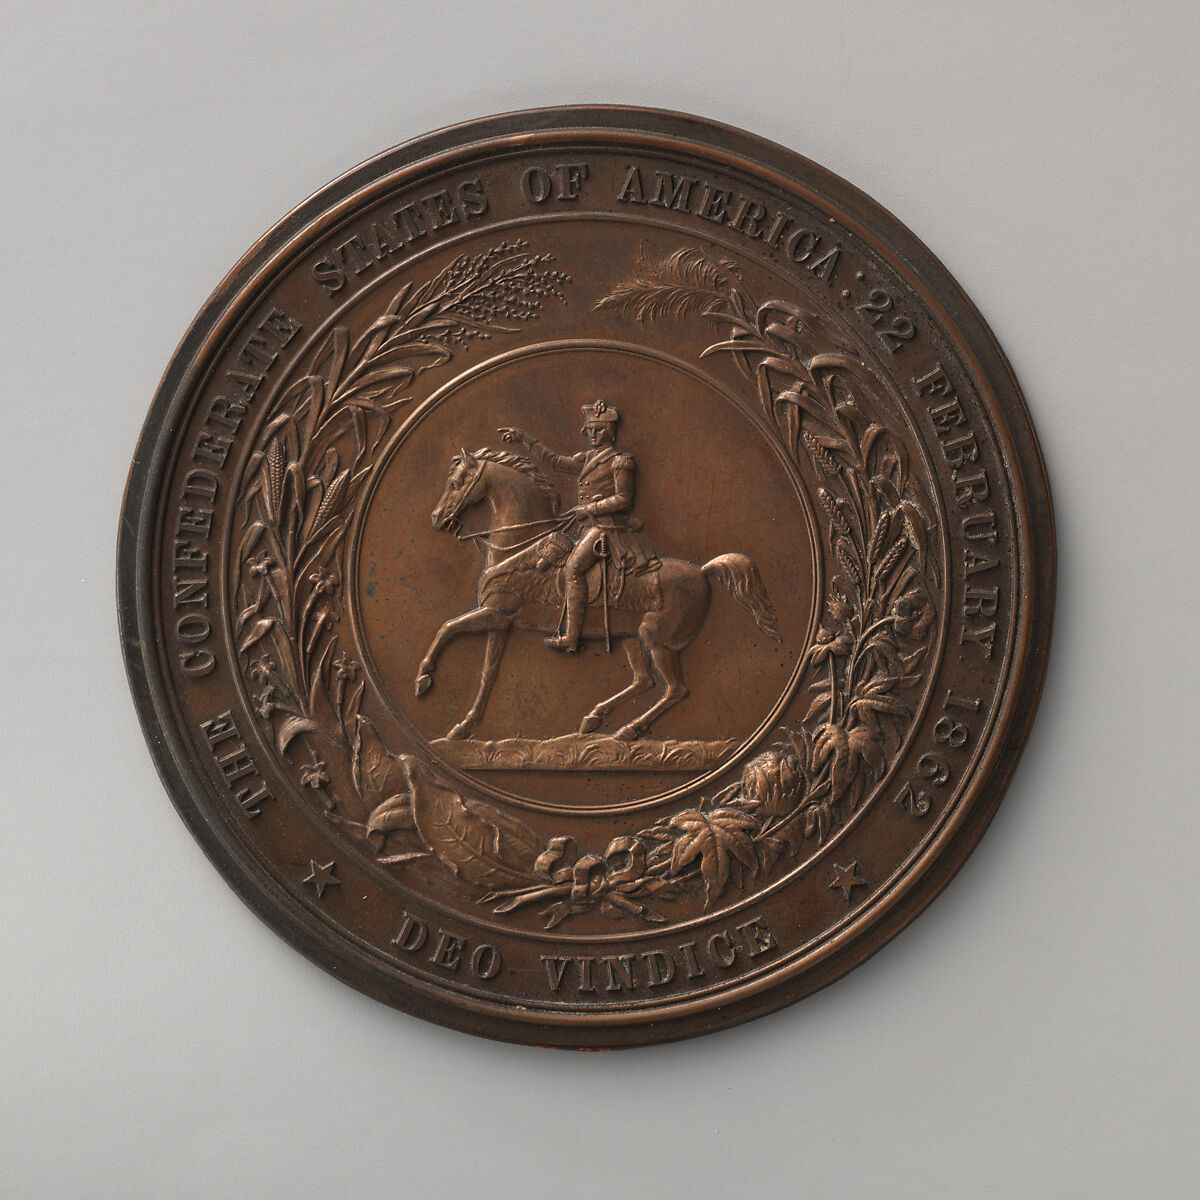 Impress of the seal of the Confederate States, 1862, Medalist: P. A. Foley (1818–1872), Bronze, Irish 